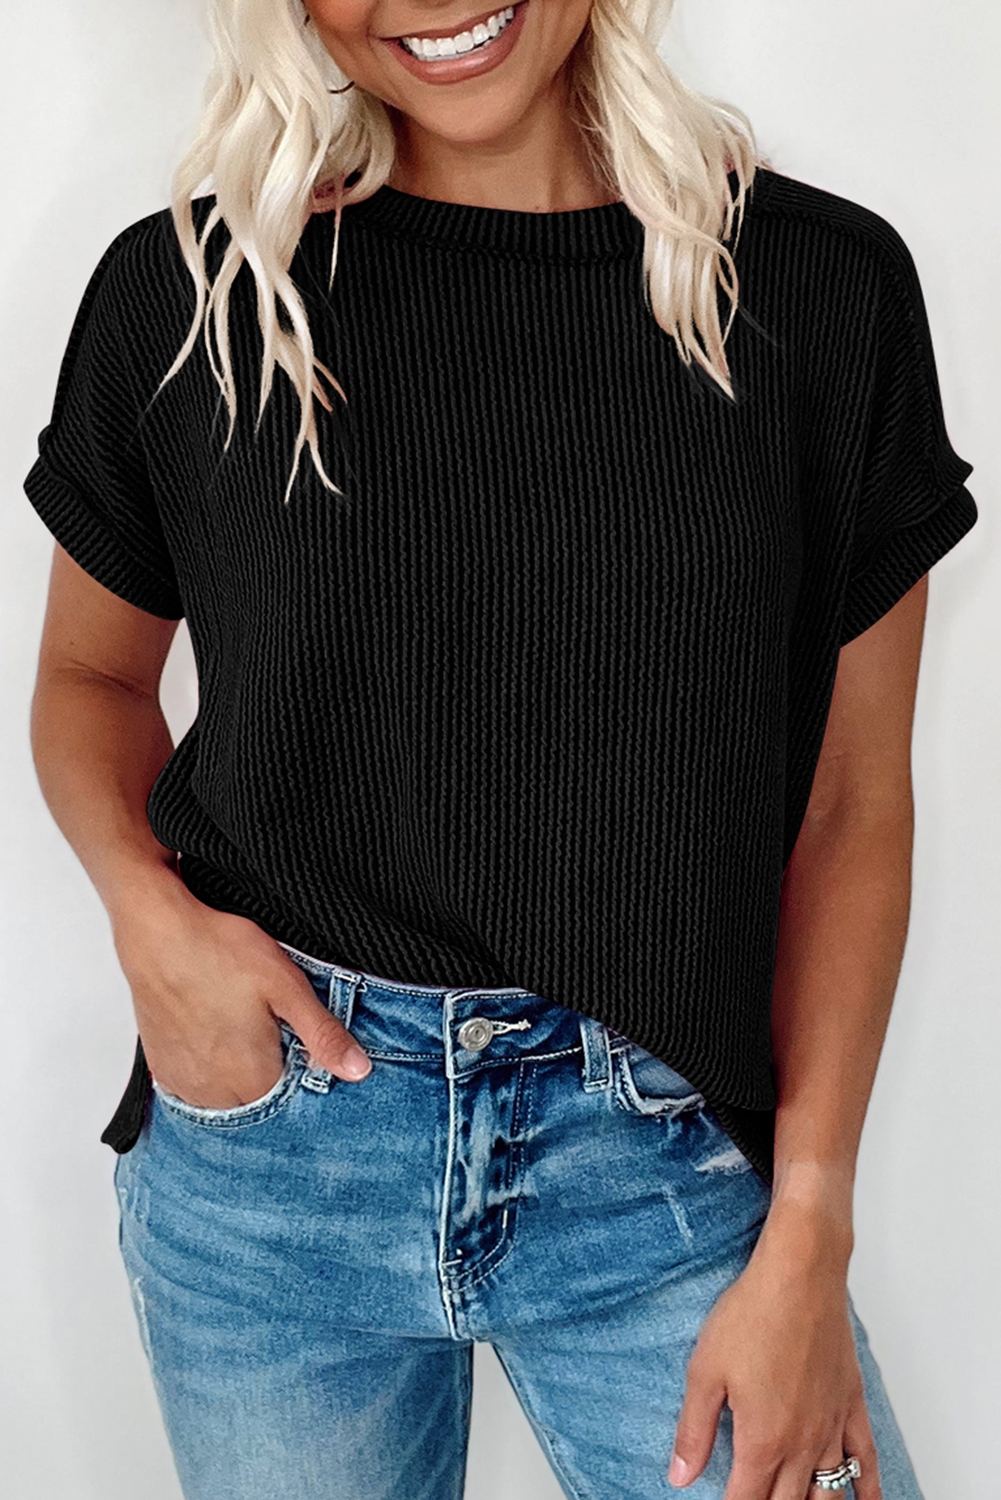 Shewin Wholesale Dropshippers Black Ribbed Knit Exposed Seam Round Neck T-SHIRT